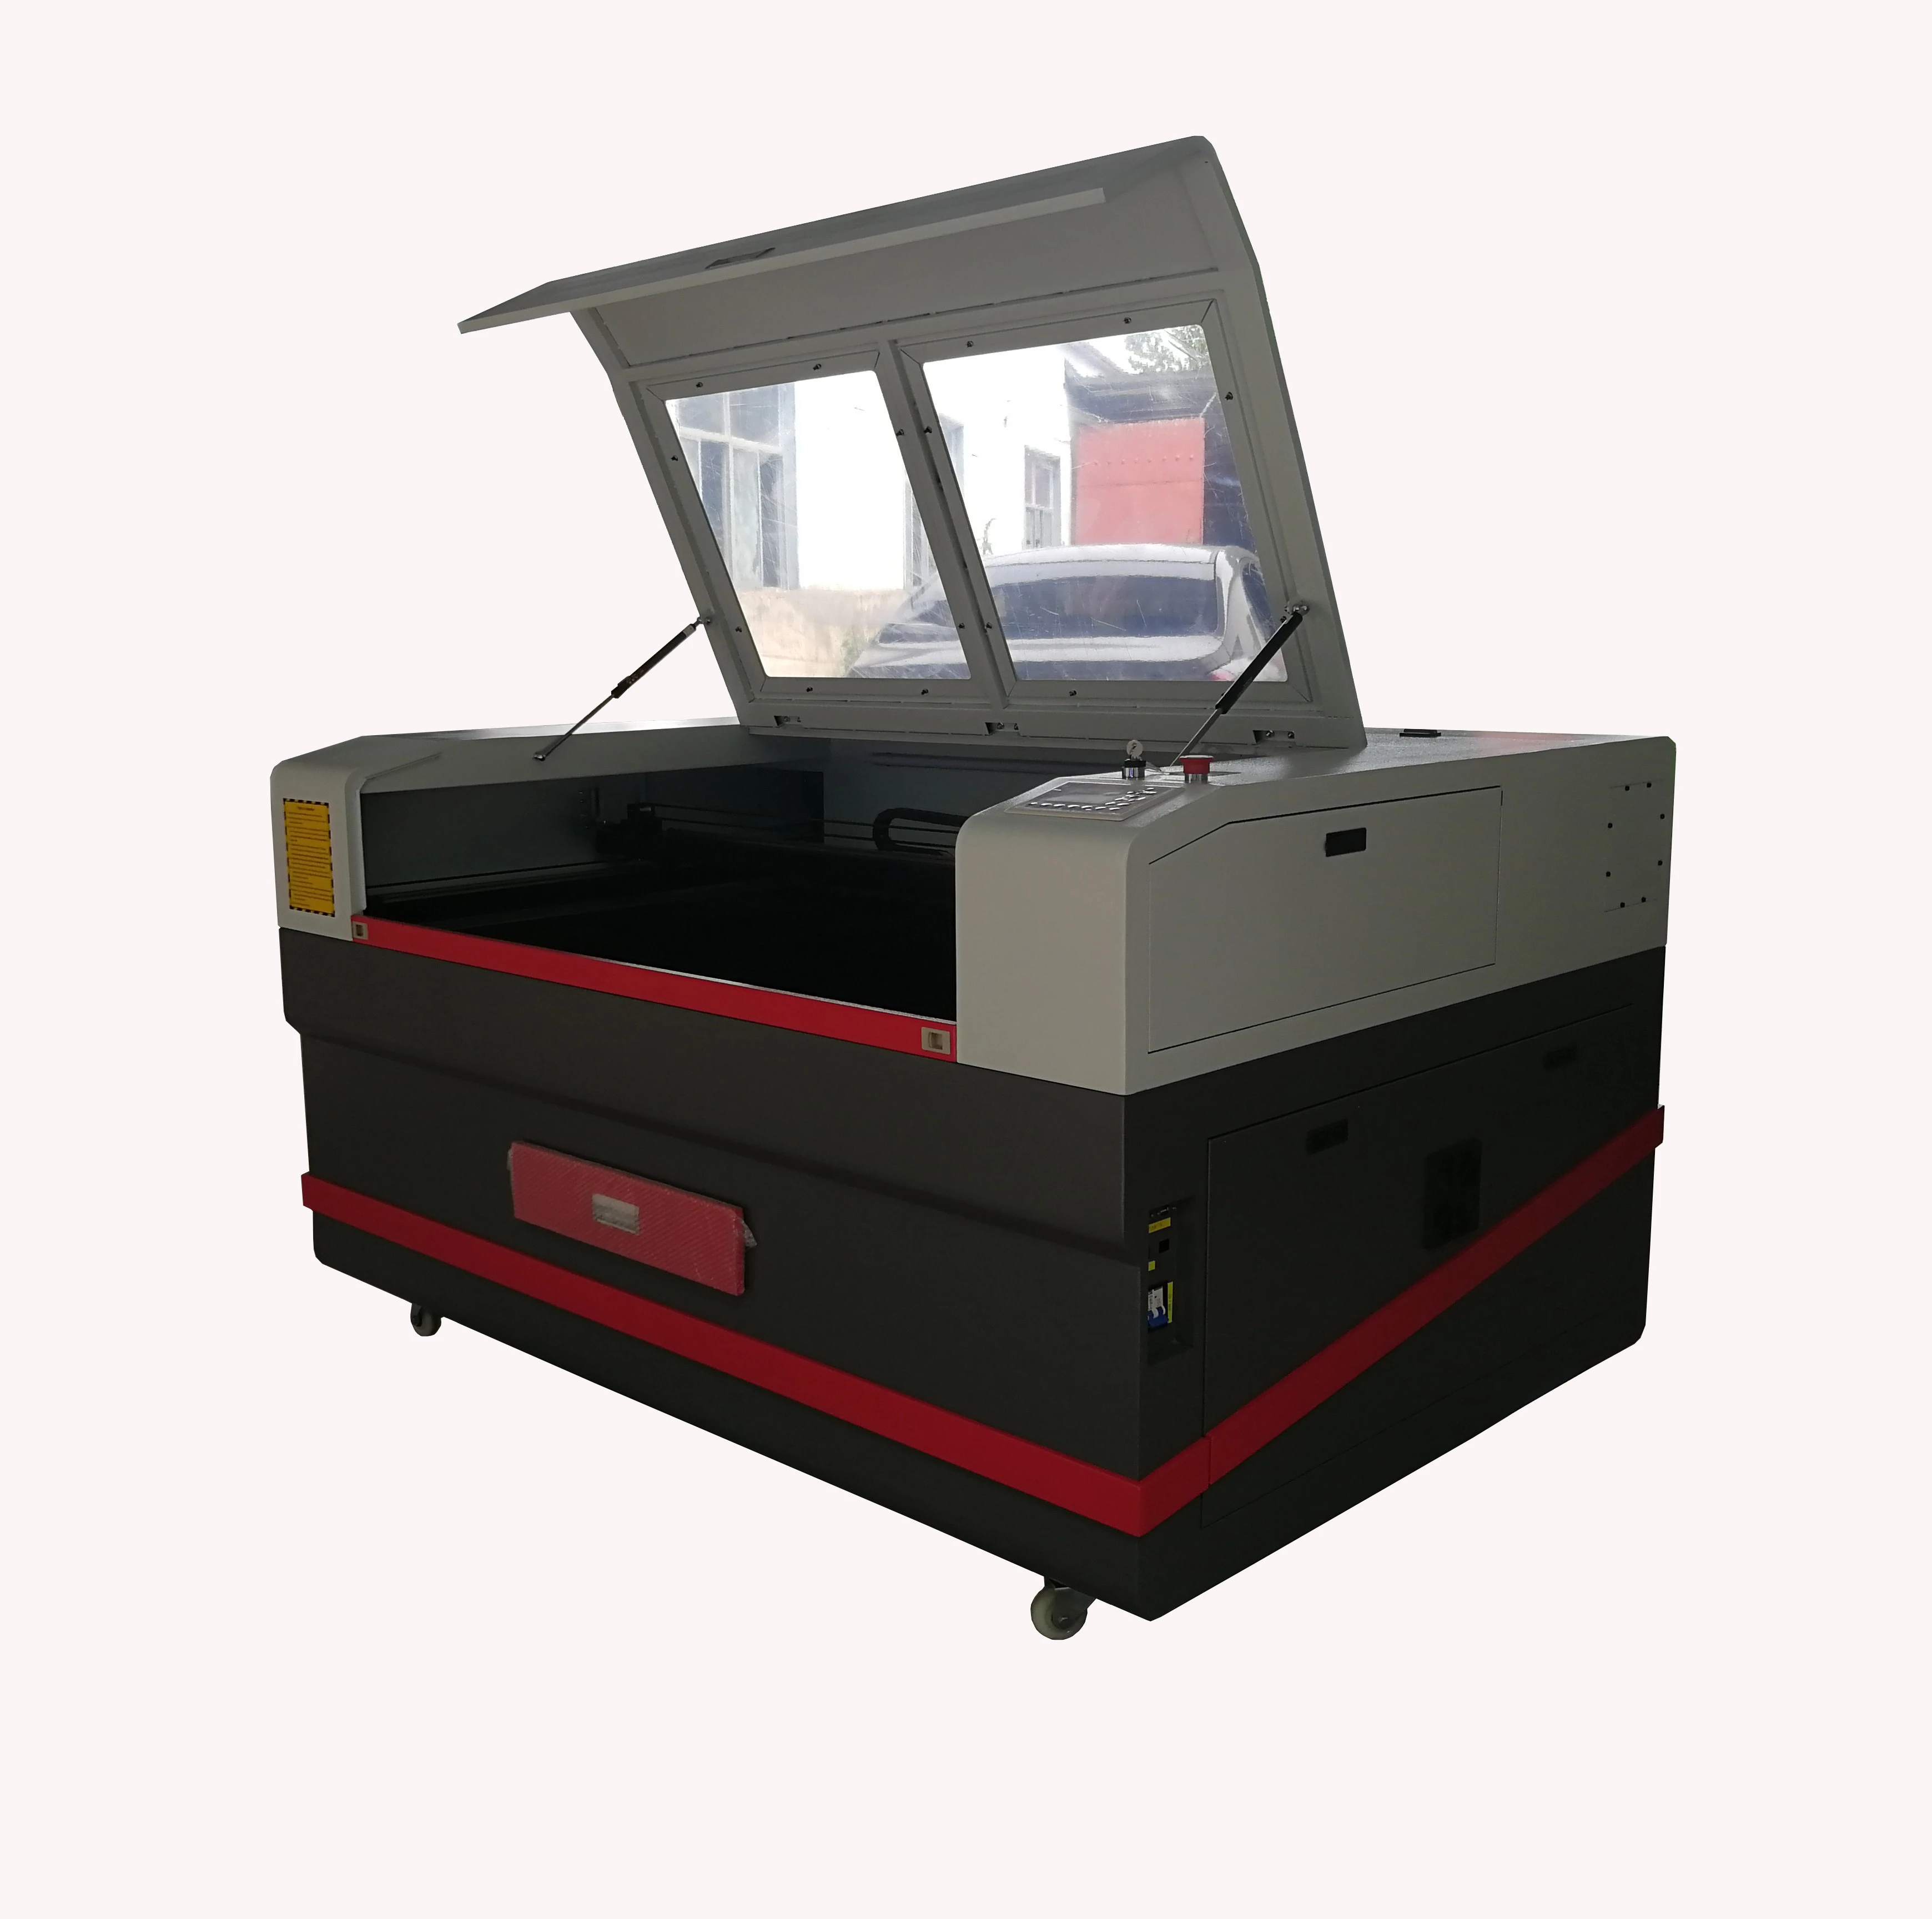 laser machine companies looking for representation partners in africa agents europeGH-1290